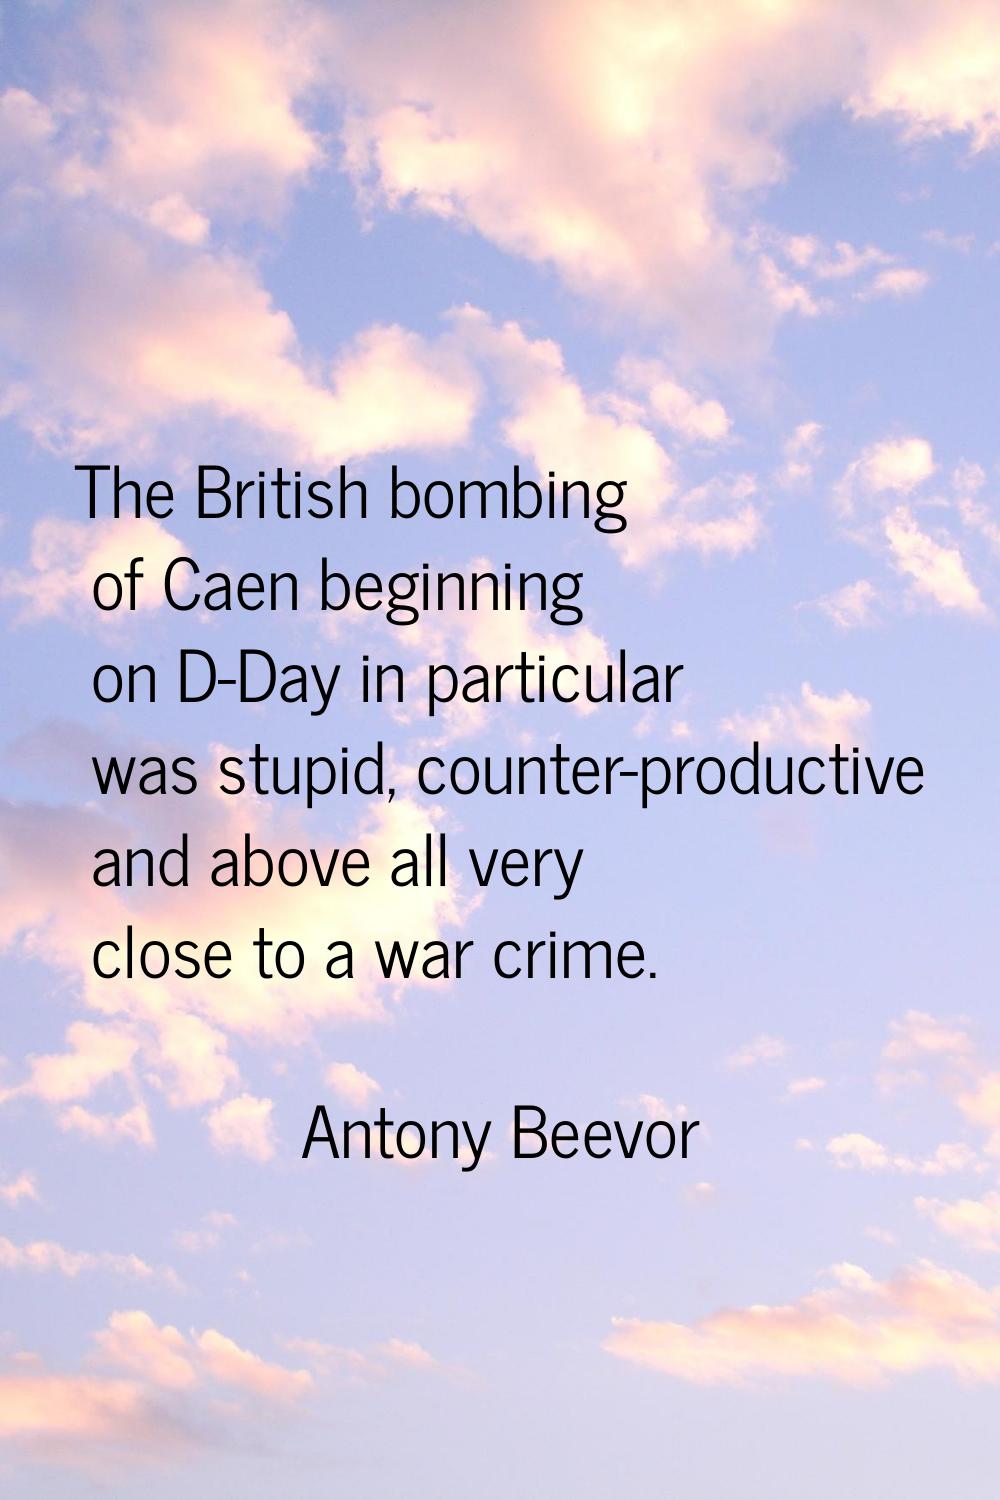 The British bombing of Caen beginning on D-Day in particular was stupid, counter-productive and abo